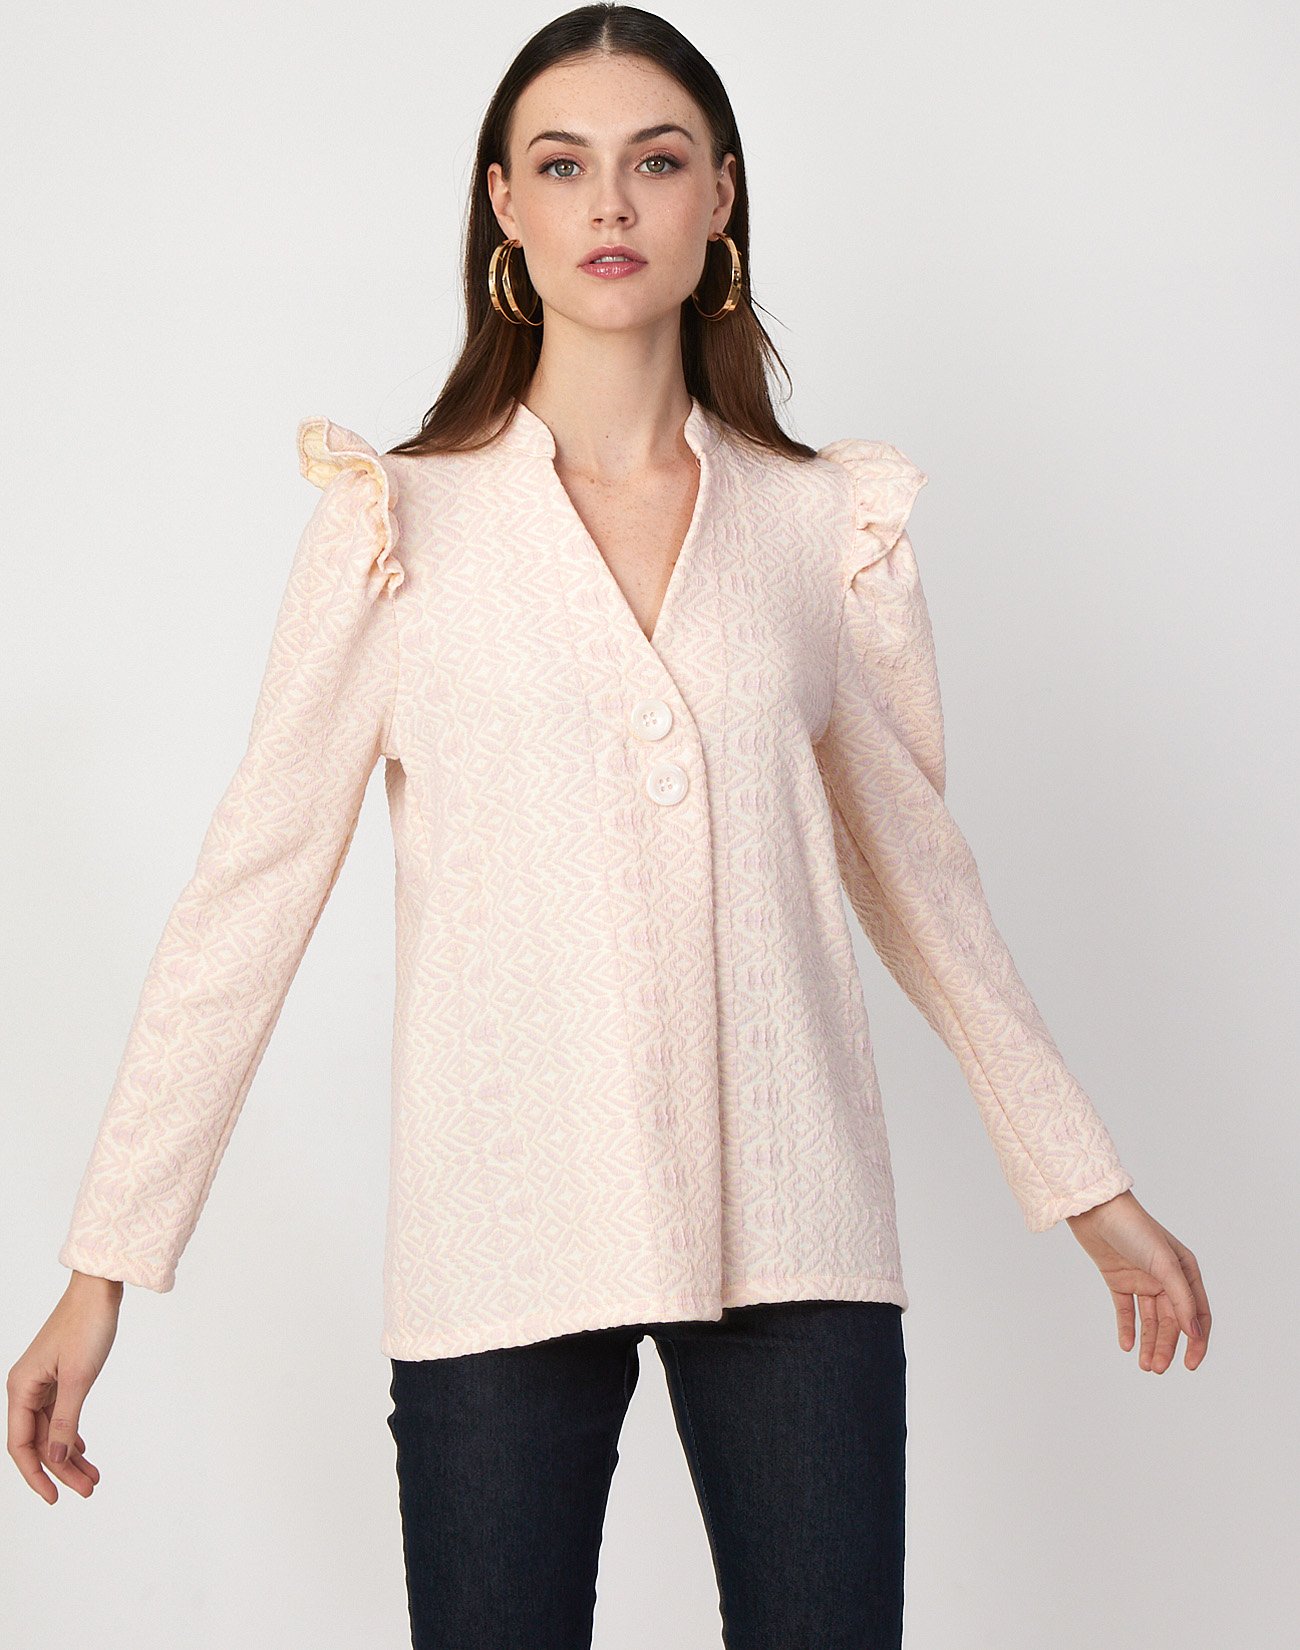 Jacquard top with buttons